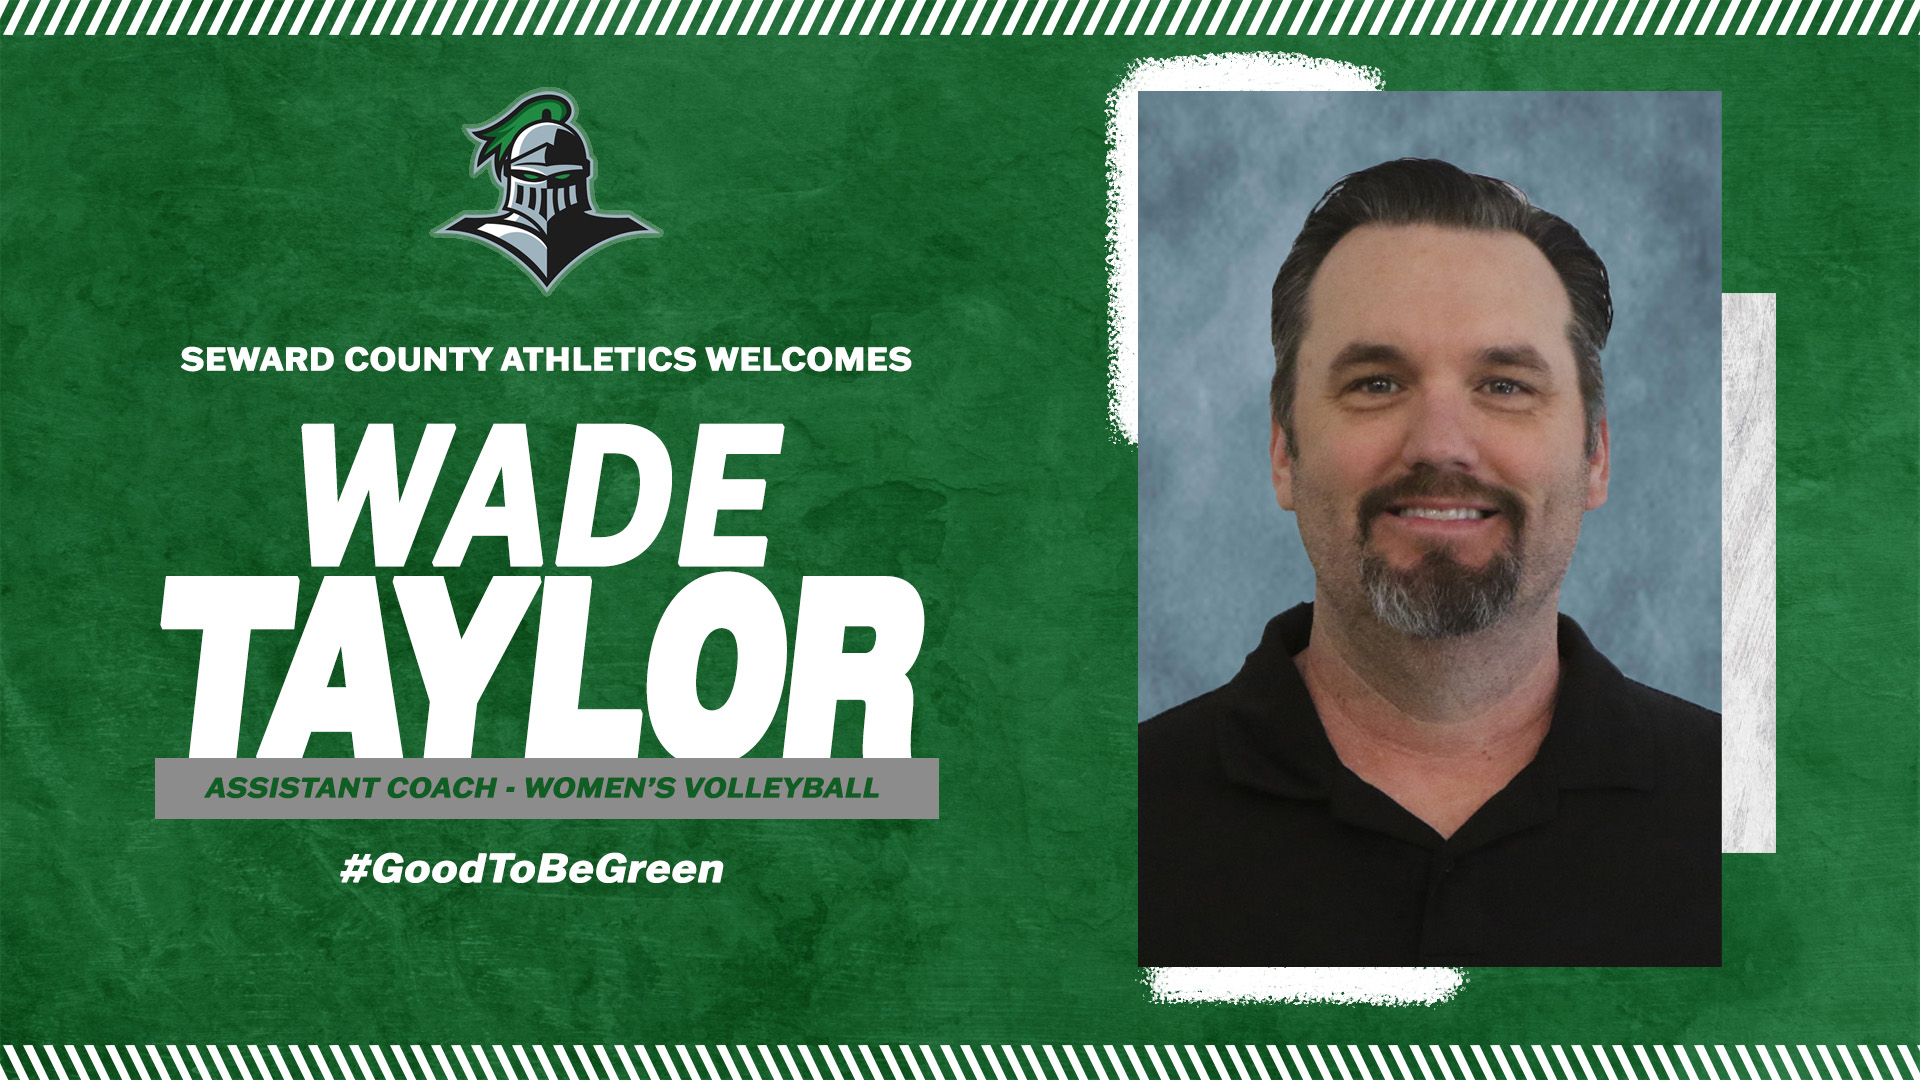 Seward County Announces Wade Taylor as Volleyball Assistant